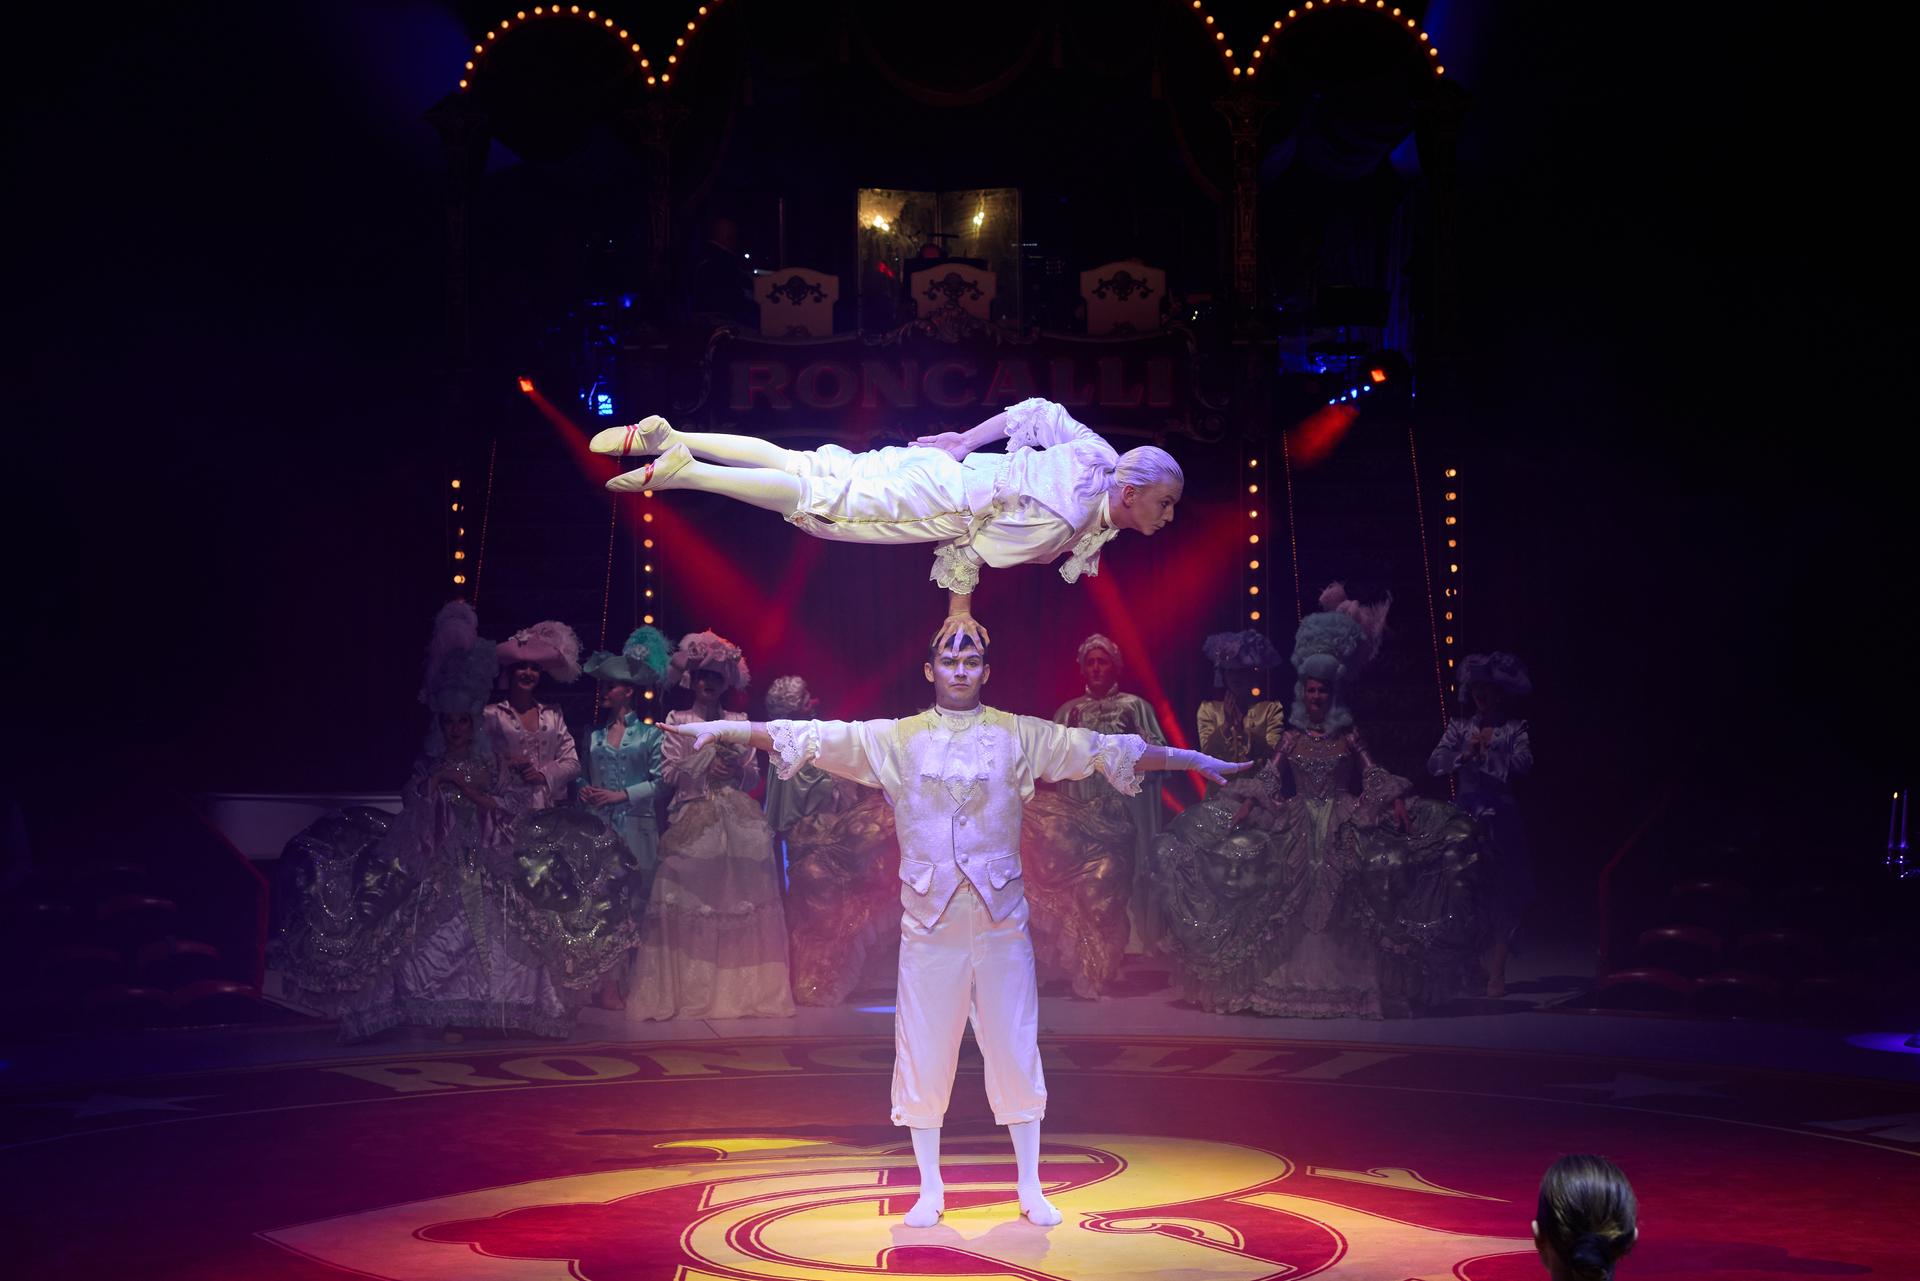 Two people balancing on each other in white outfits